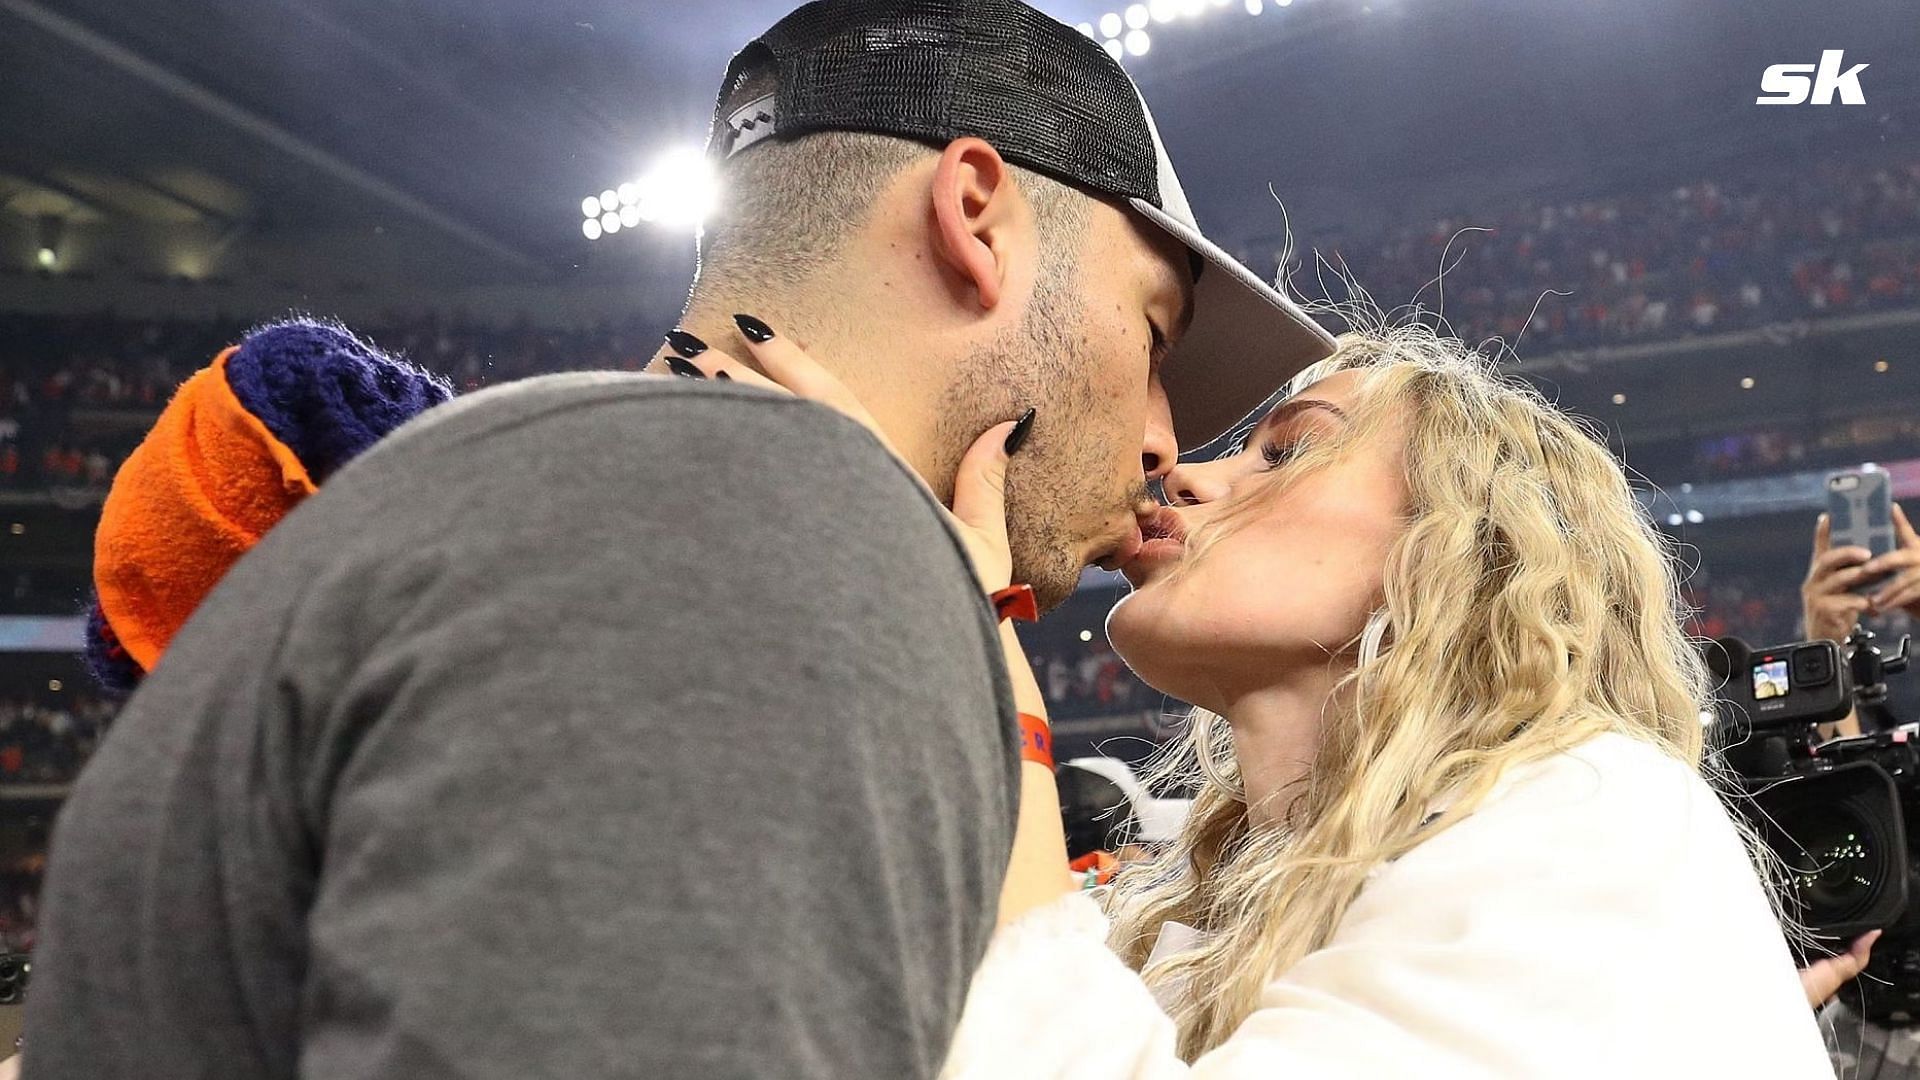 MLB All-Star Carlos Correa marked Christmas with his wife Daniella in midst of the contract drama